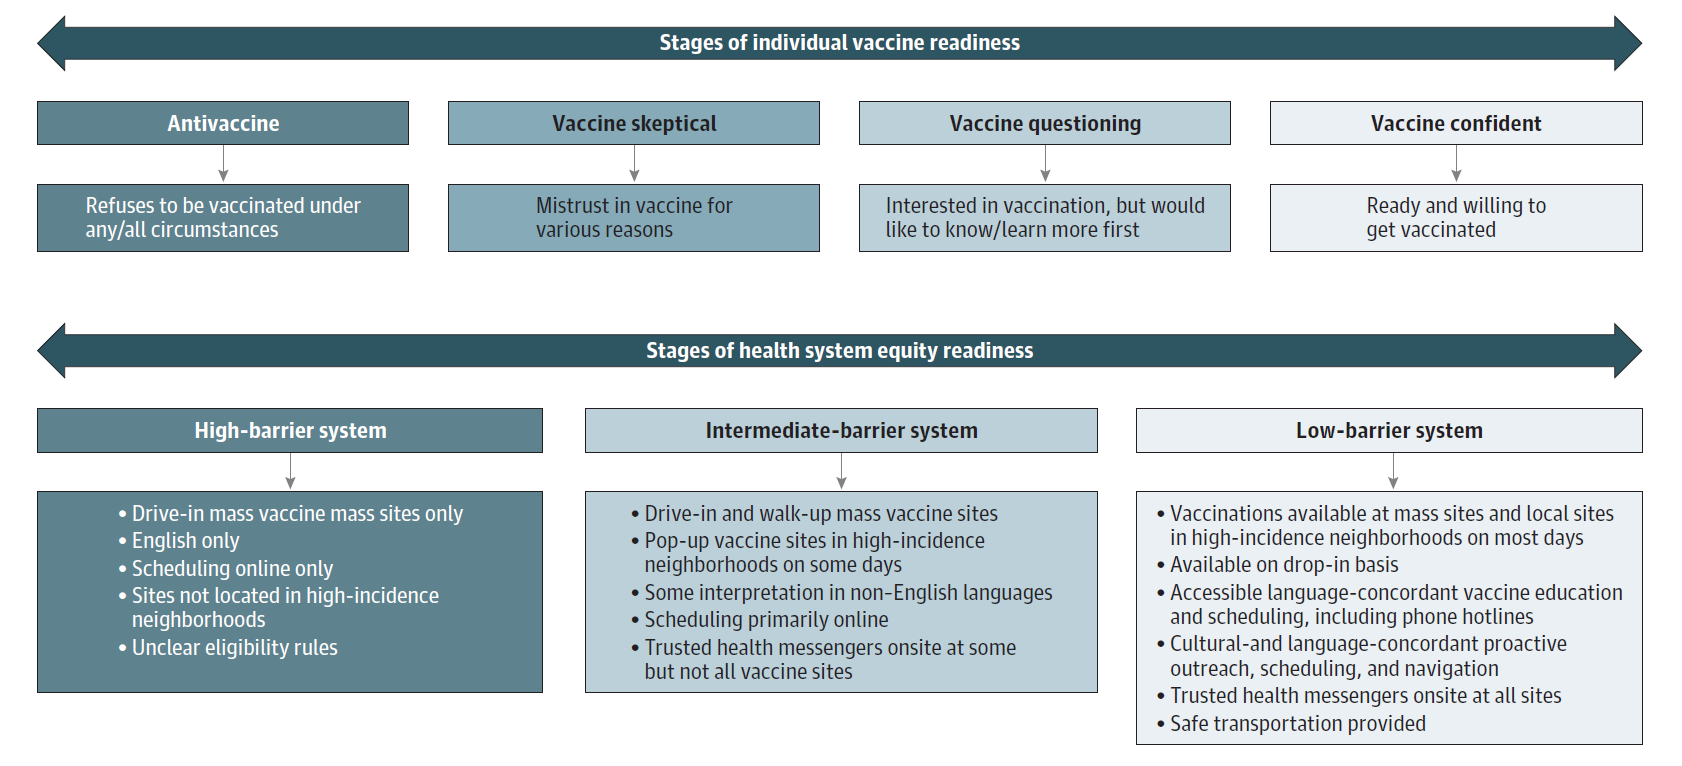 Stages of vaccine readiness and stages of health system equity readiness shown